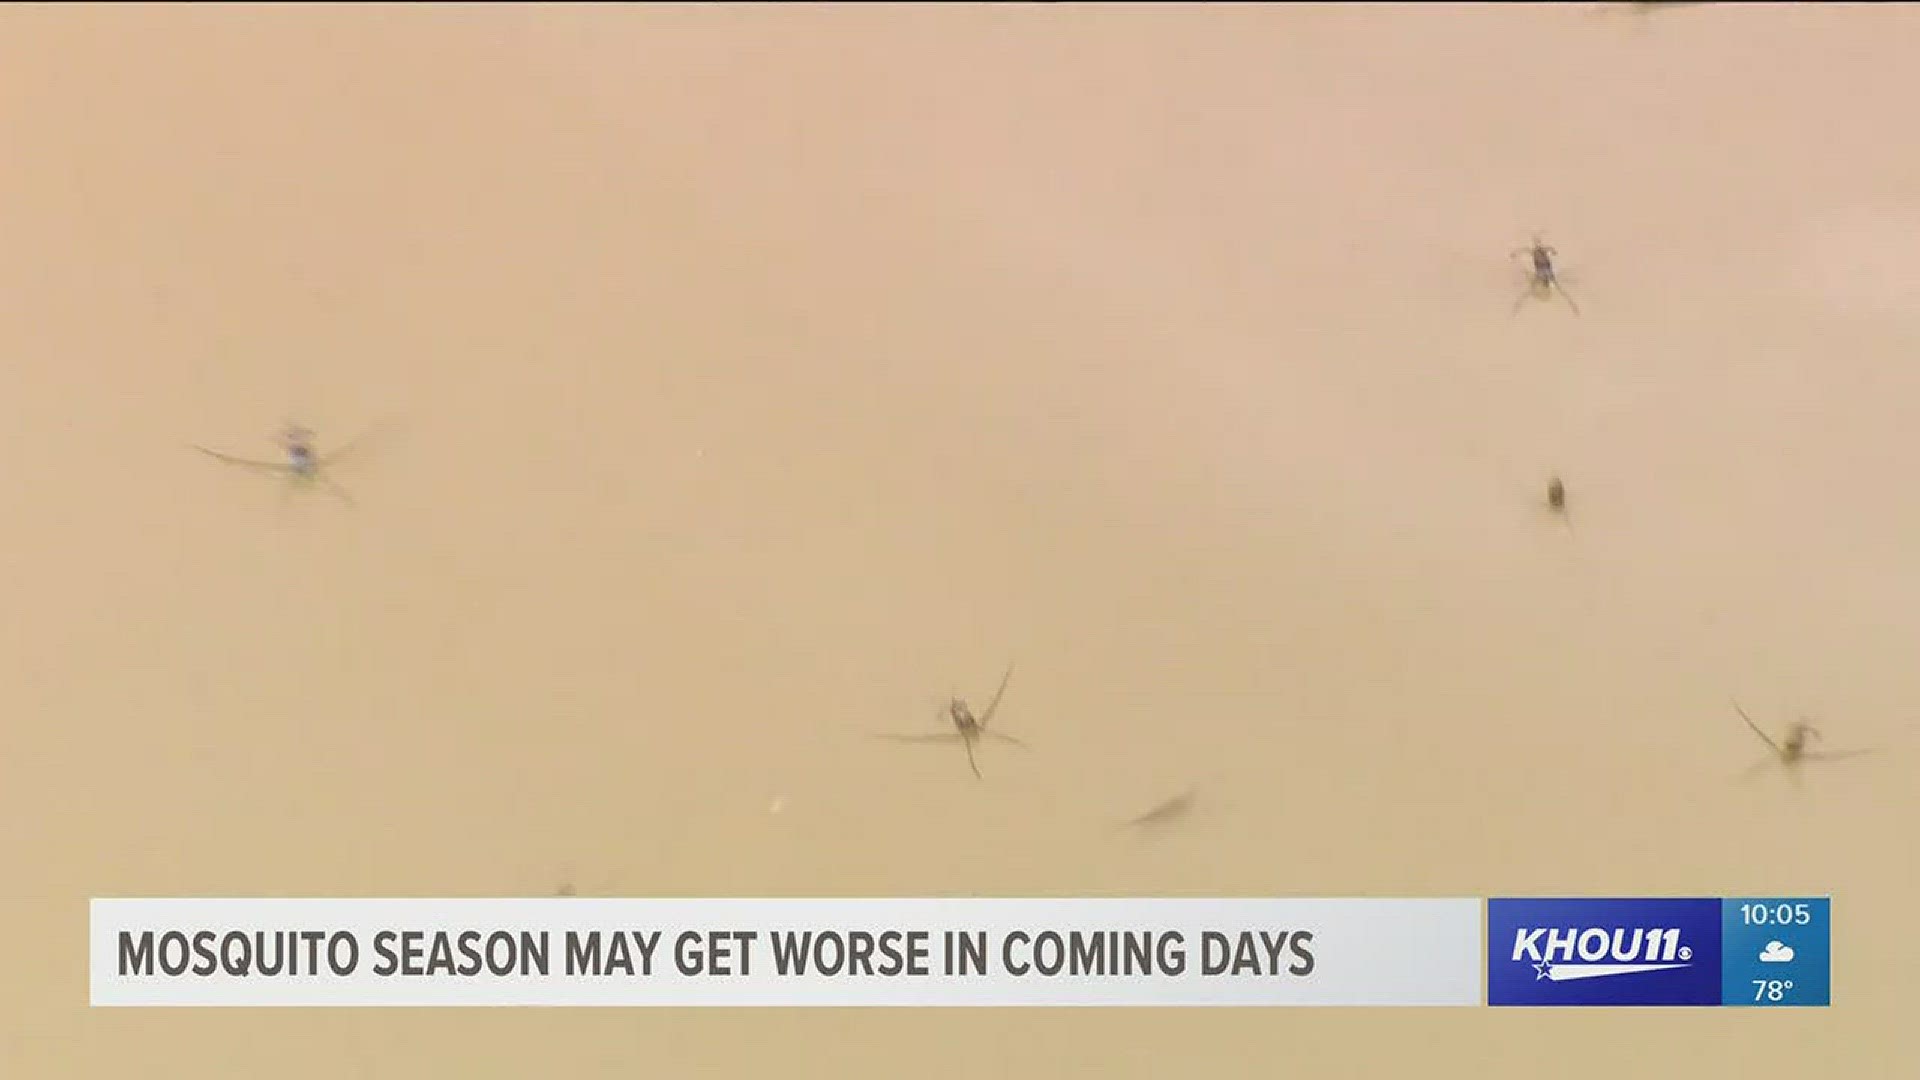 Mosquito Control in Brazoria County says they're concerned the mosquito problem there could worse after the rain this weekend.